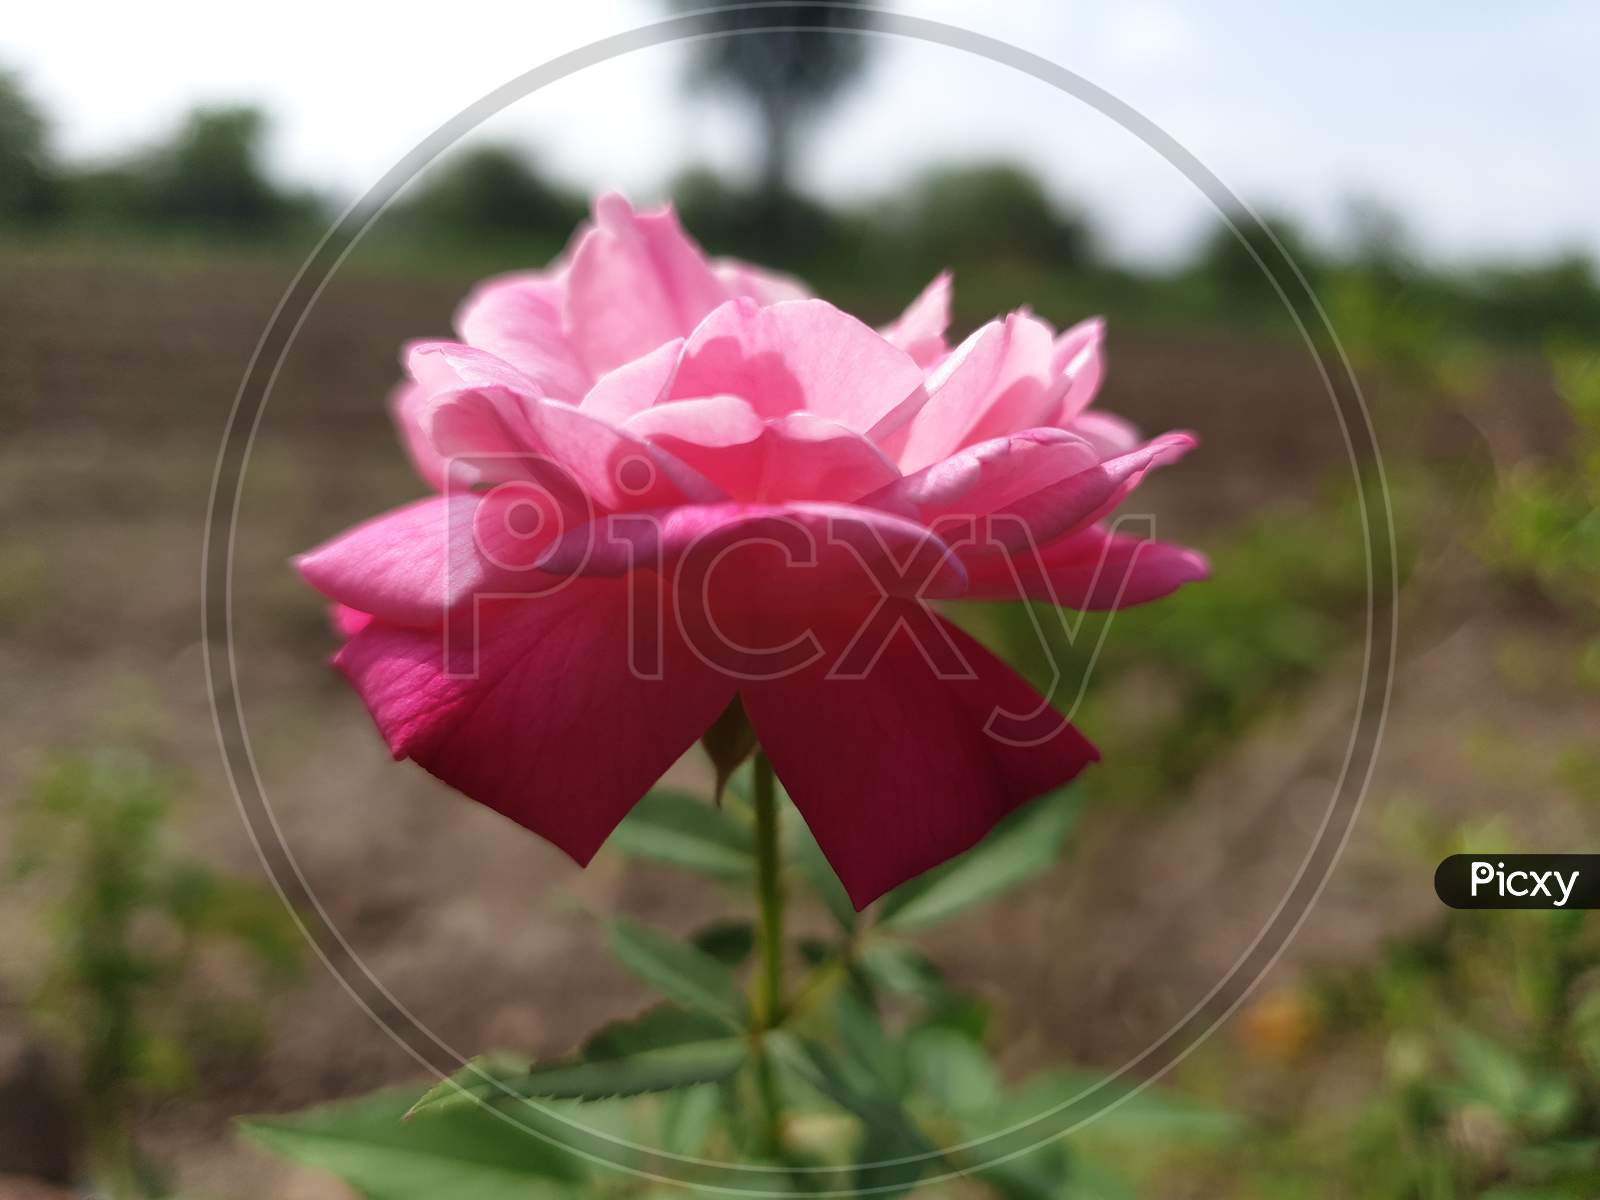 This is pink Rose flower